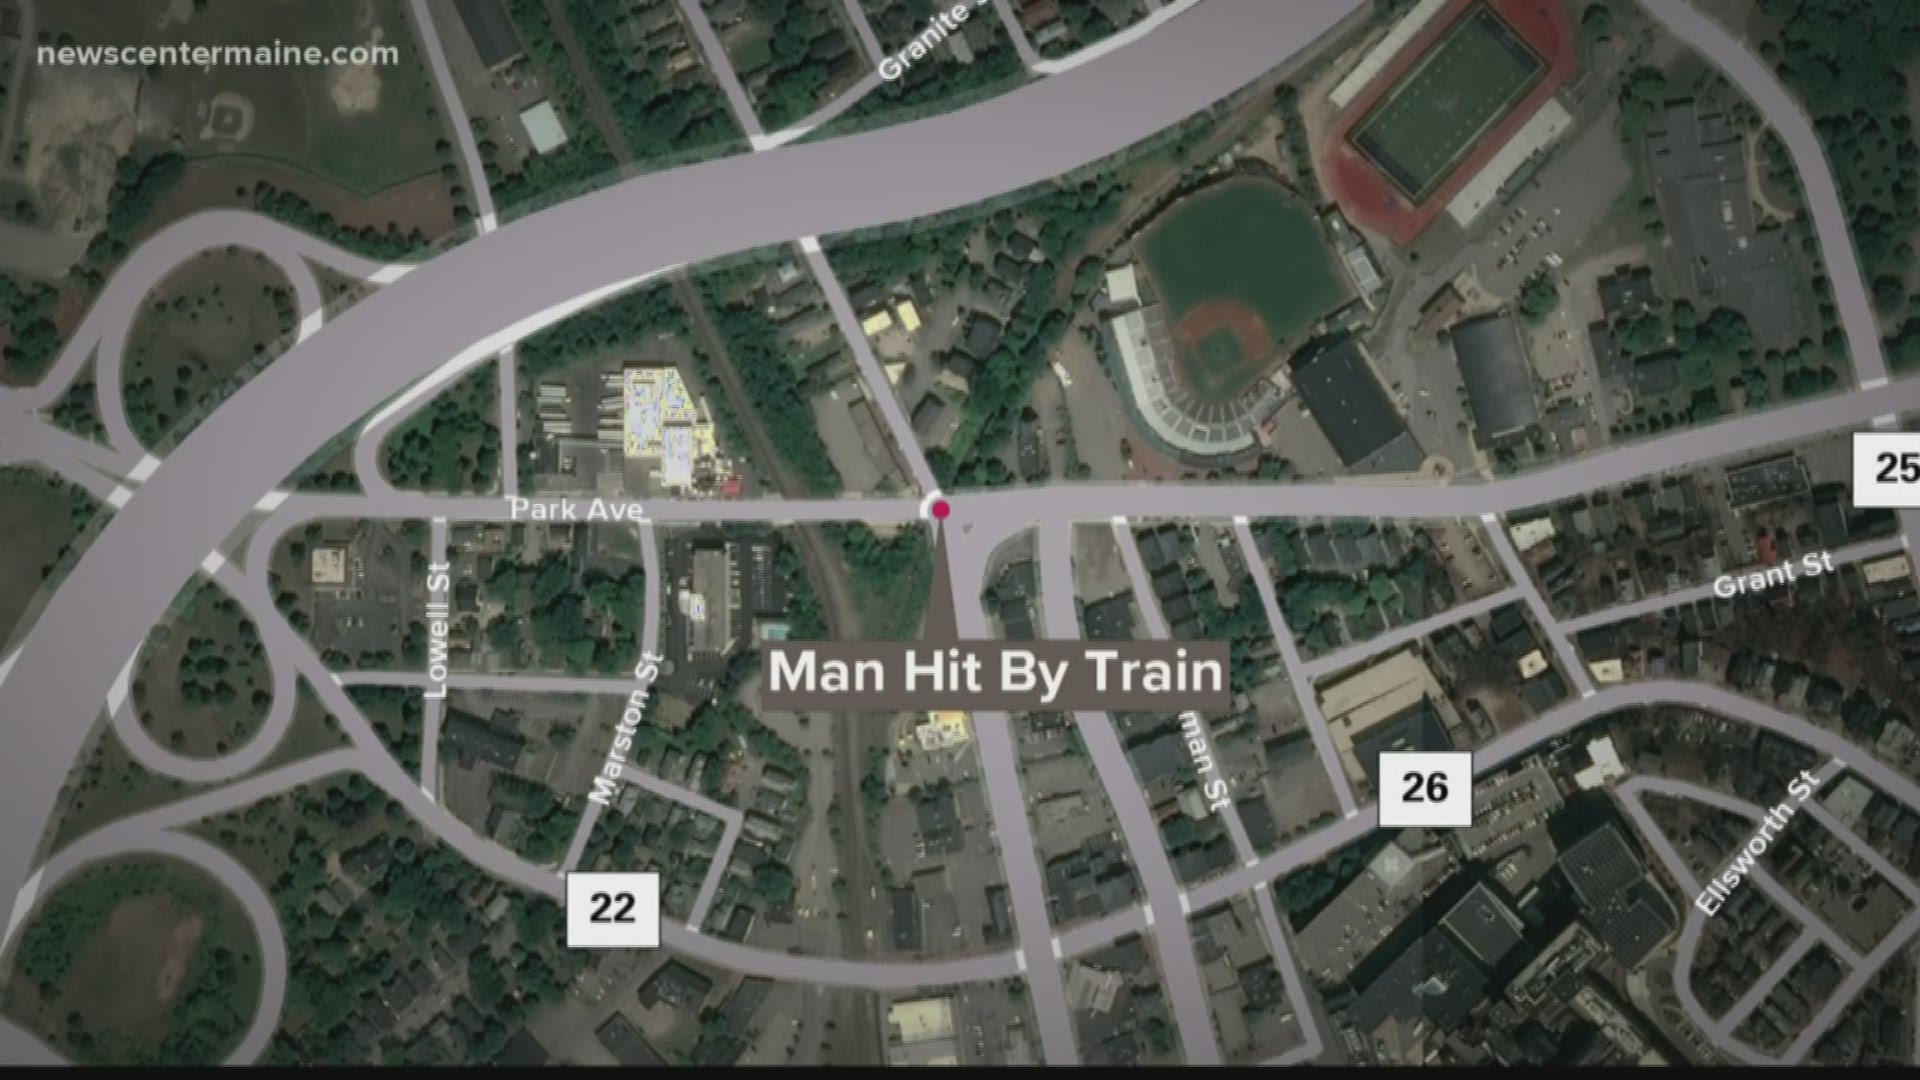 Police say they are investigating after a man was hit by a train in Portland on Sunday afternoon around 3:00 p.m. near Park Avenue and Saint John Street.